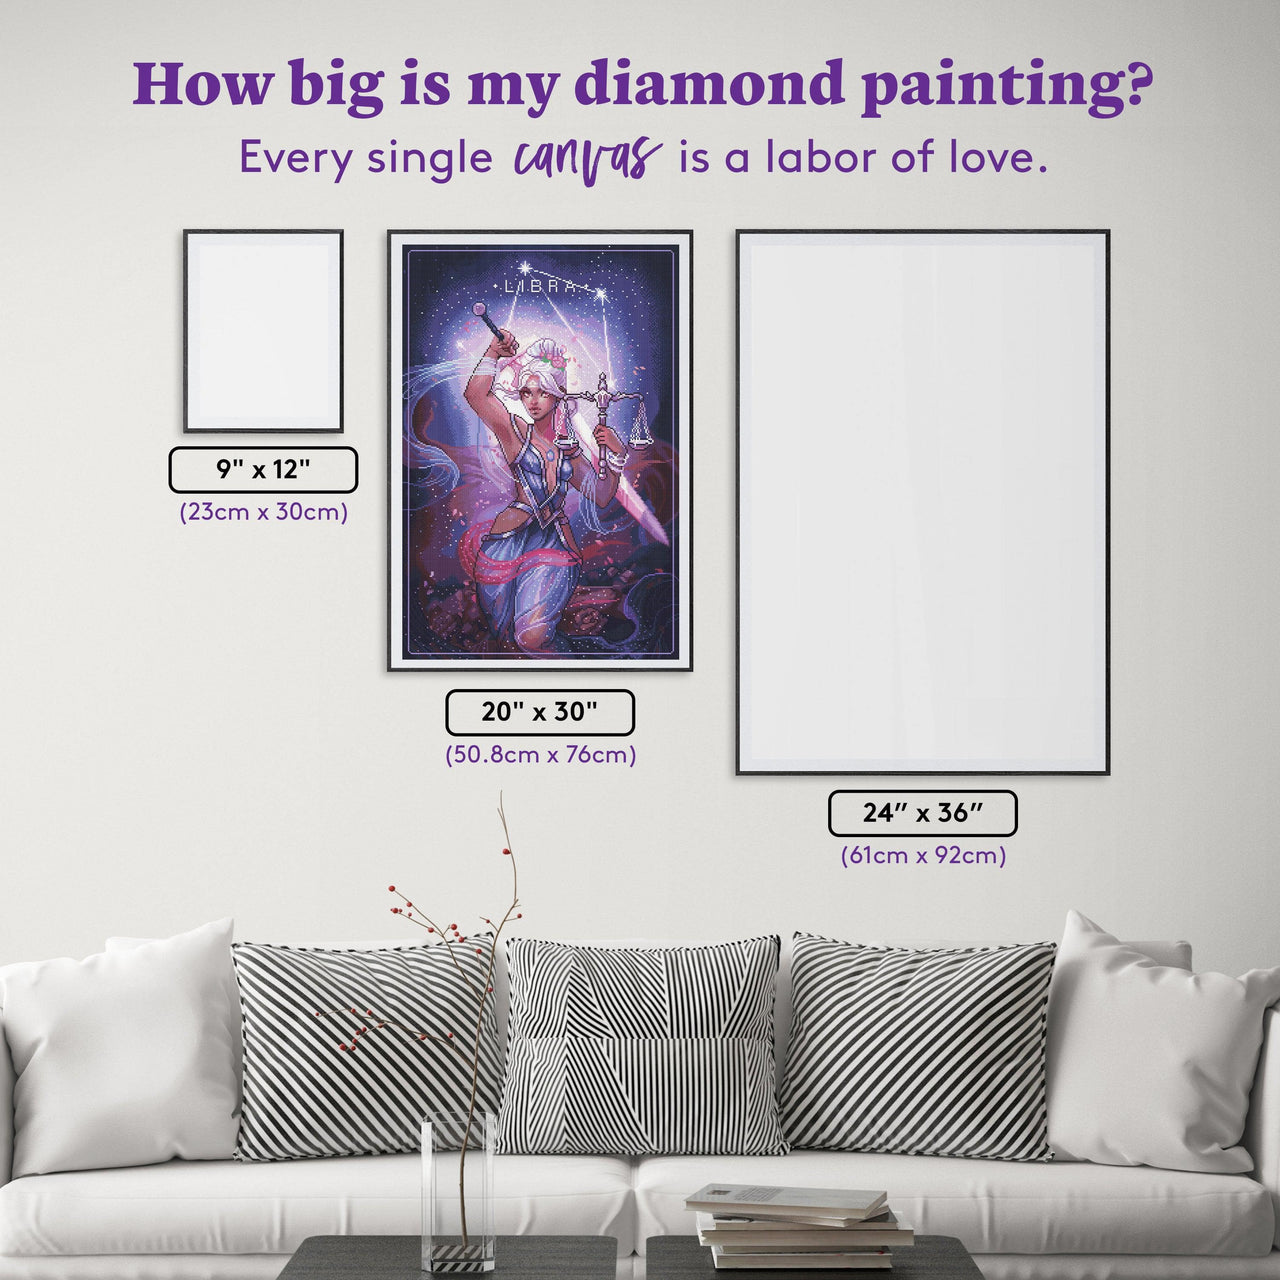 Diamond Painting Libra - CB 20" x 30" (50.8cm x 76cm) / Square with 51 Colors including 4 ABs and 2 Iridescent Diamonds / 62,424